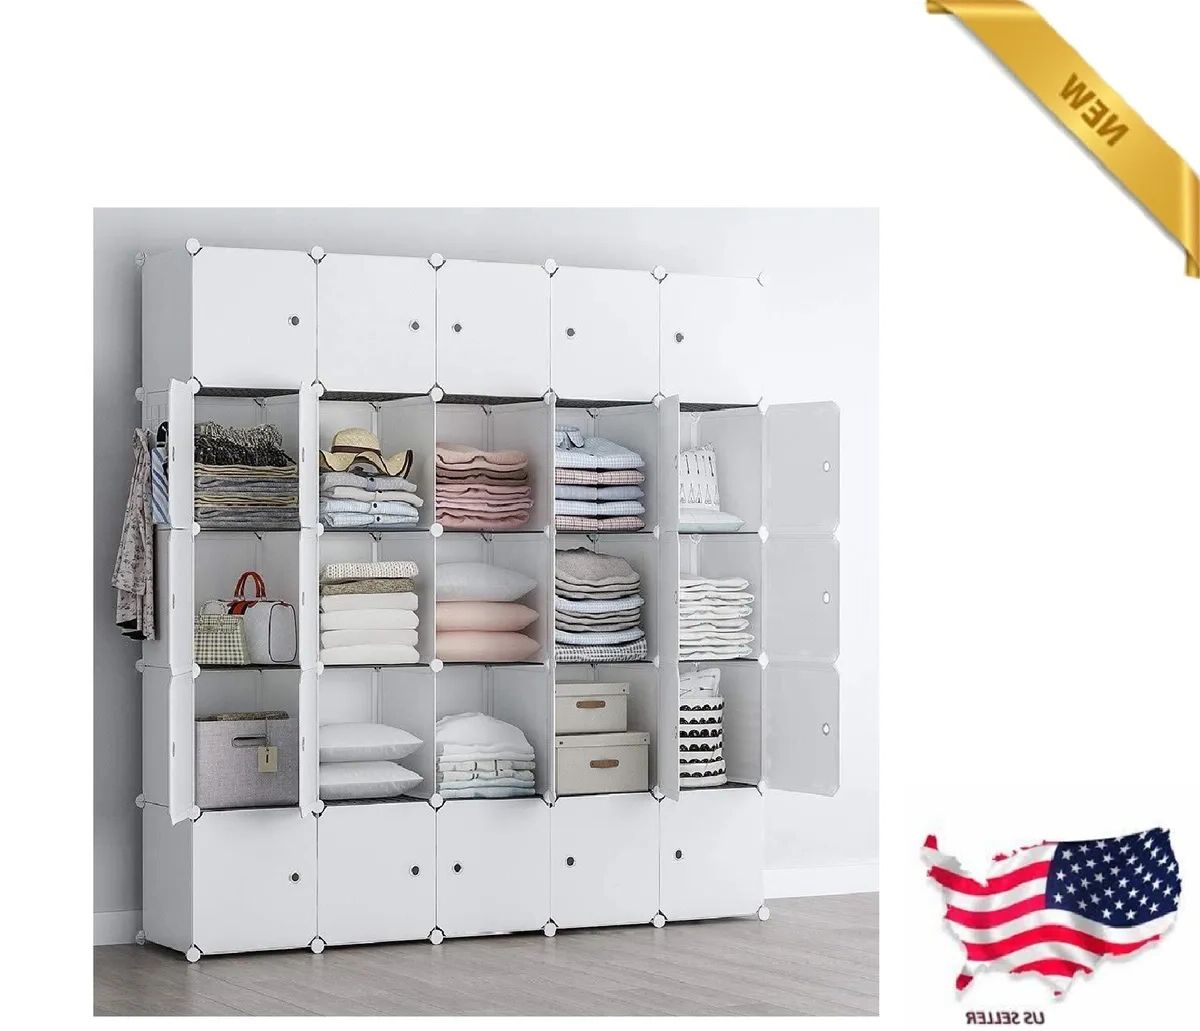 Cube Storage Organzier Portable Closet Wardrobe Bedroom Dresser 25 Cubes  White | Ebay Within Wardrobes With Cube Compartments (View 10 of 20)